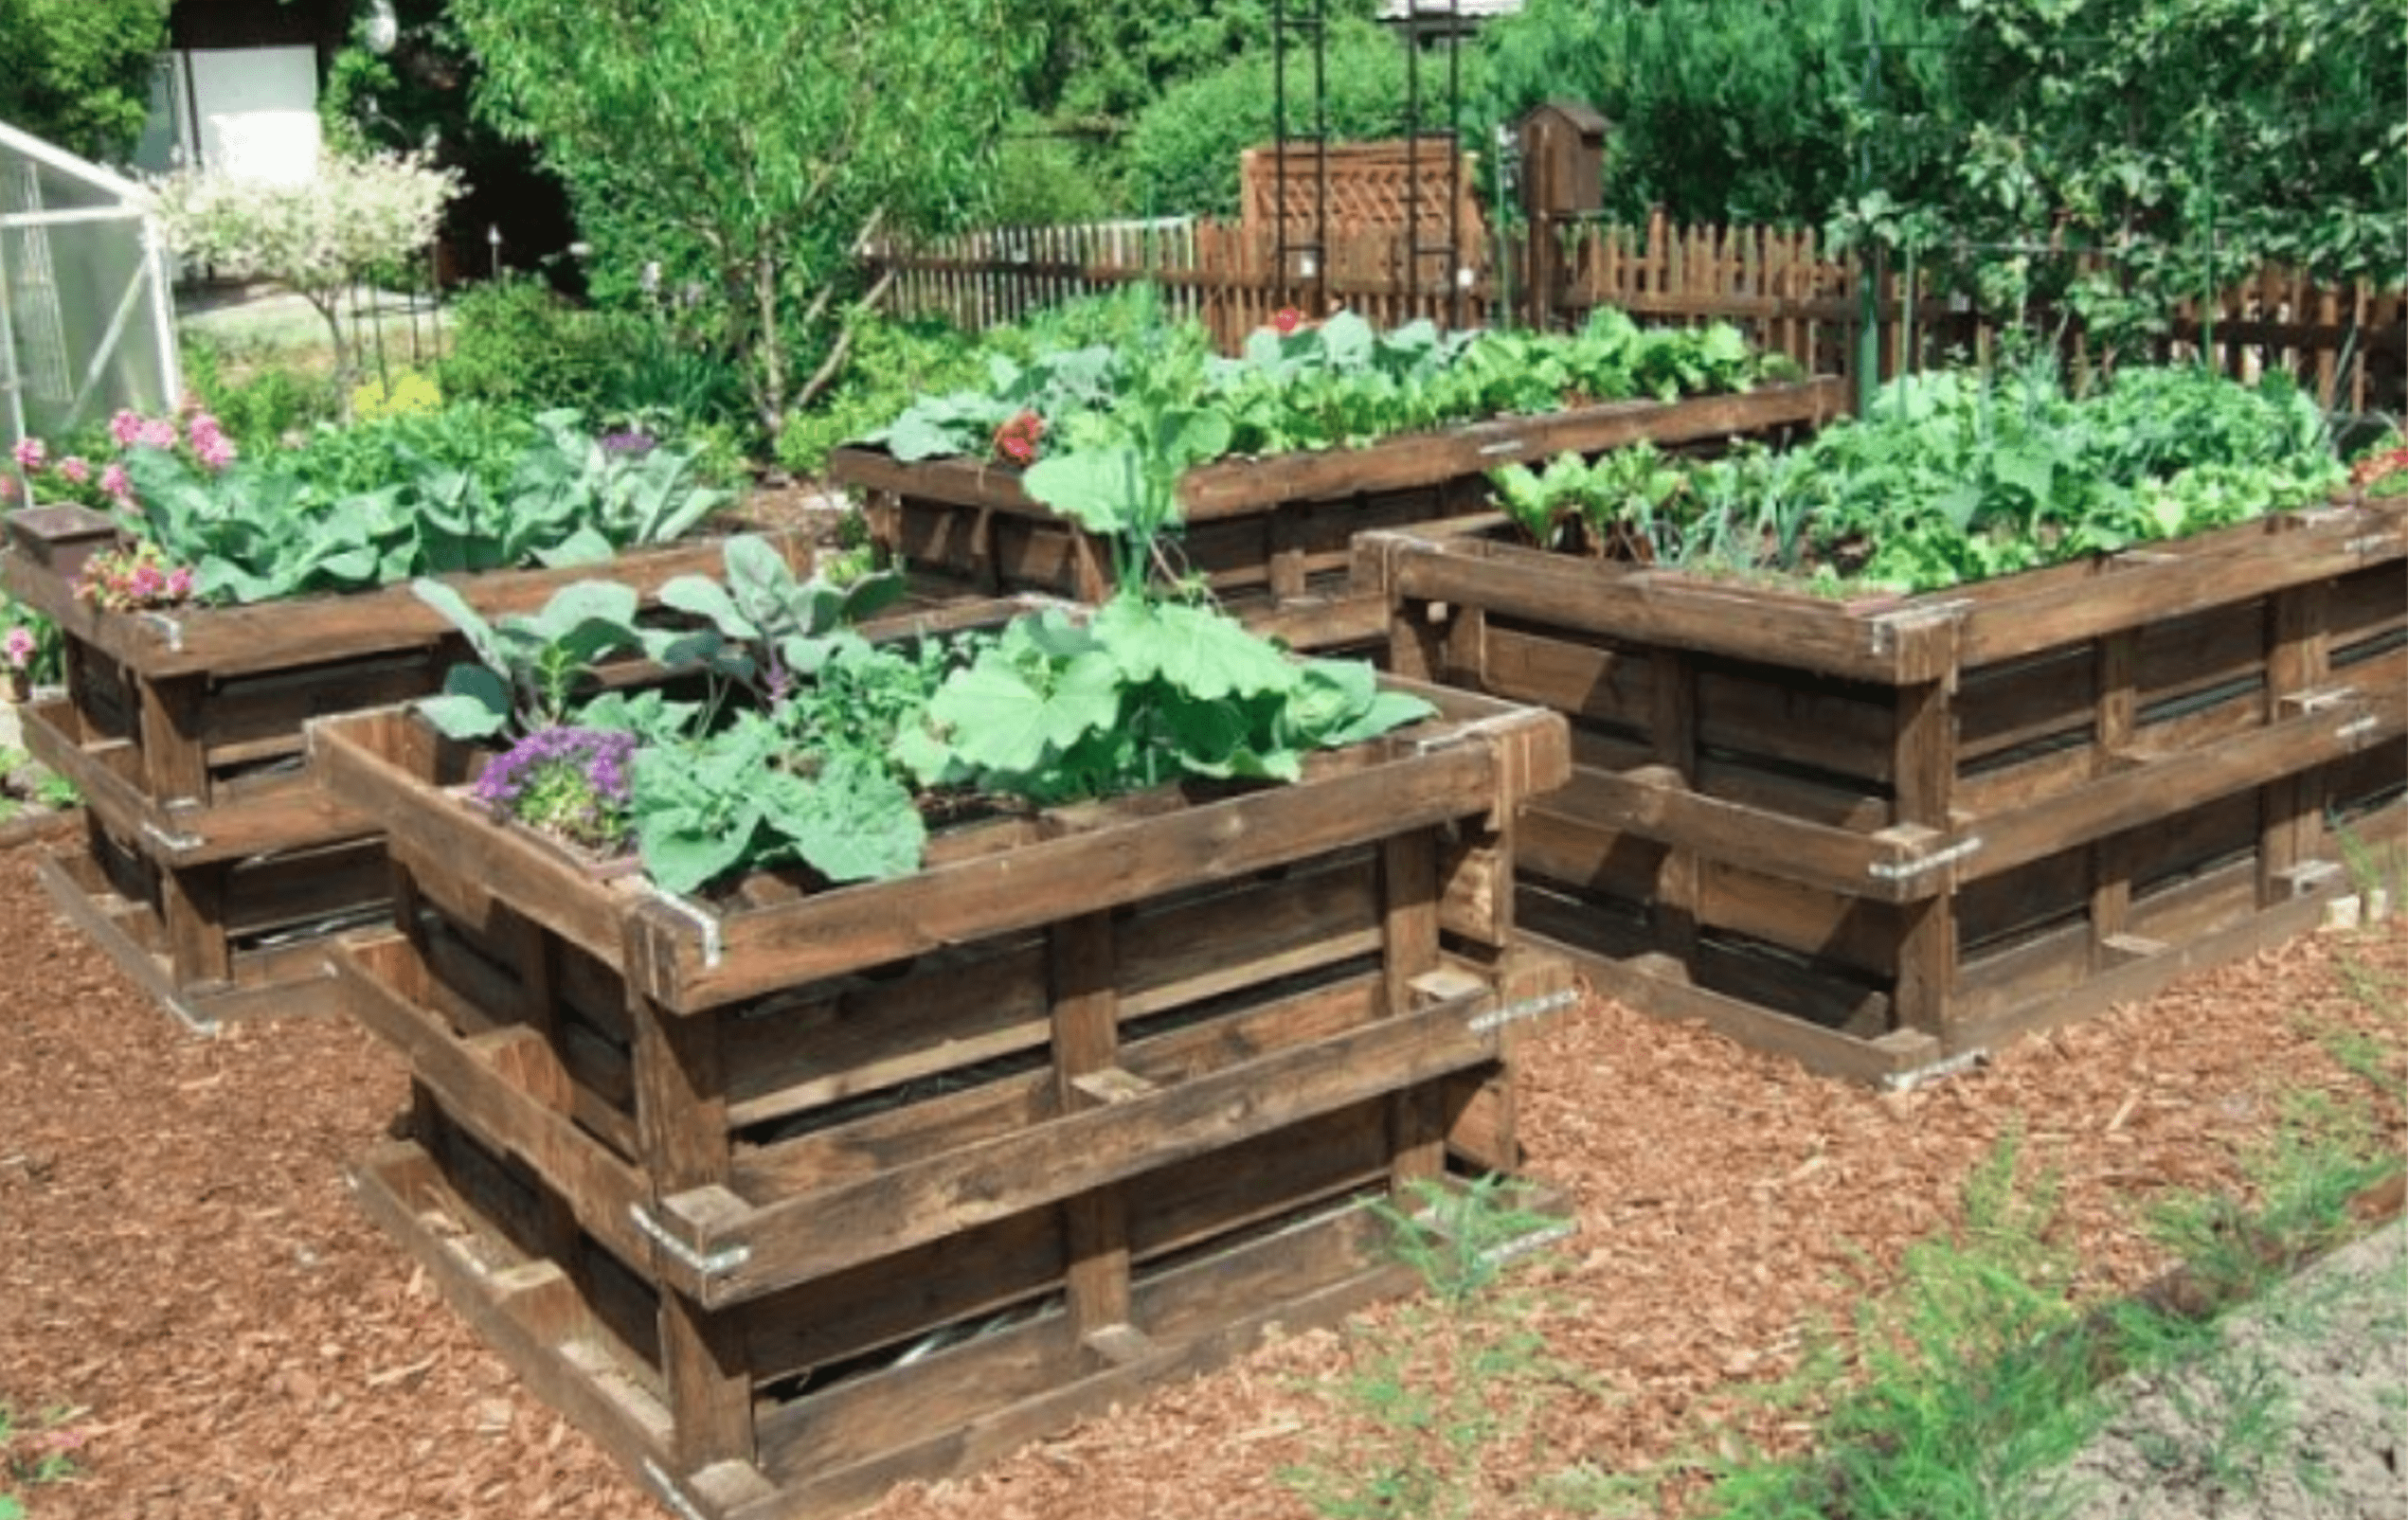 20 ideas for landscaping gardens and backyards with pallets - 161